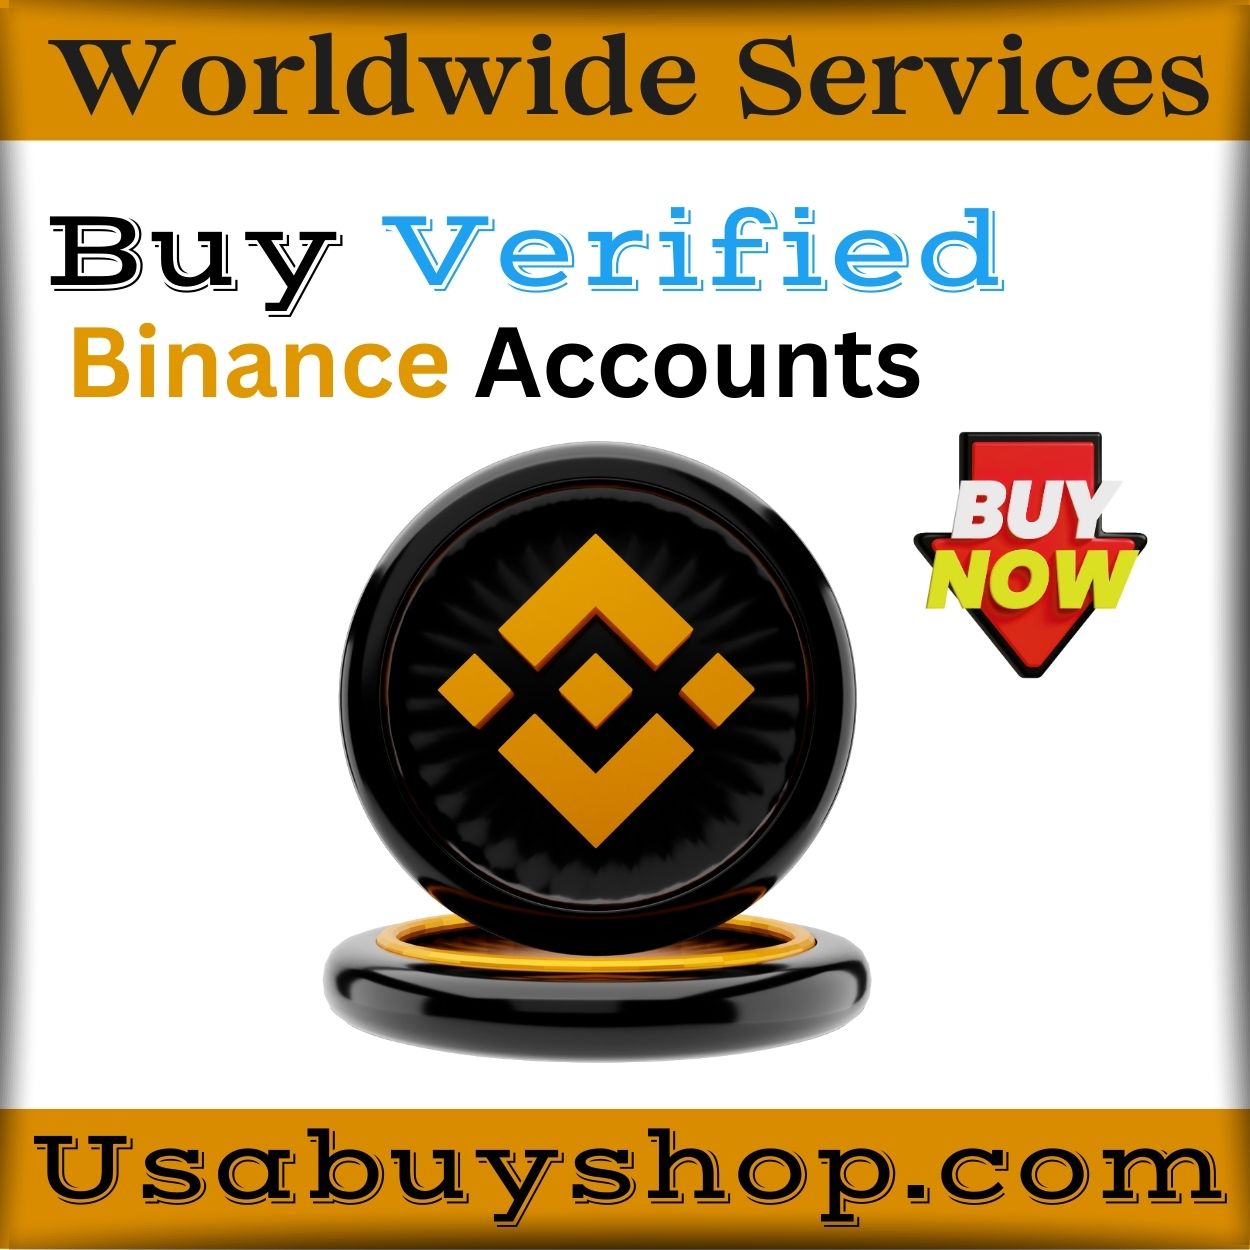 Buy Verified Binance Accounts - 100% Secure & Instant Access